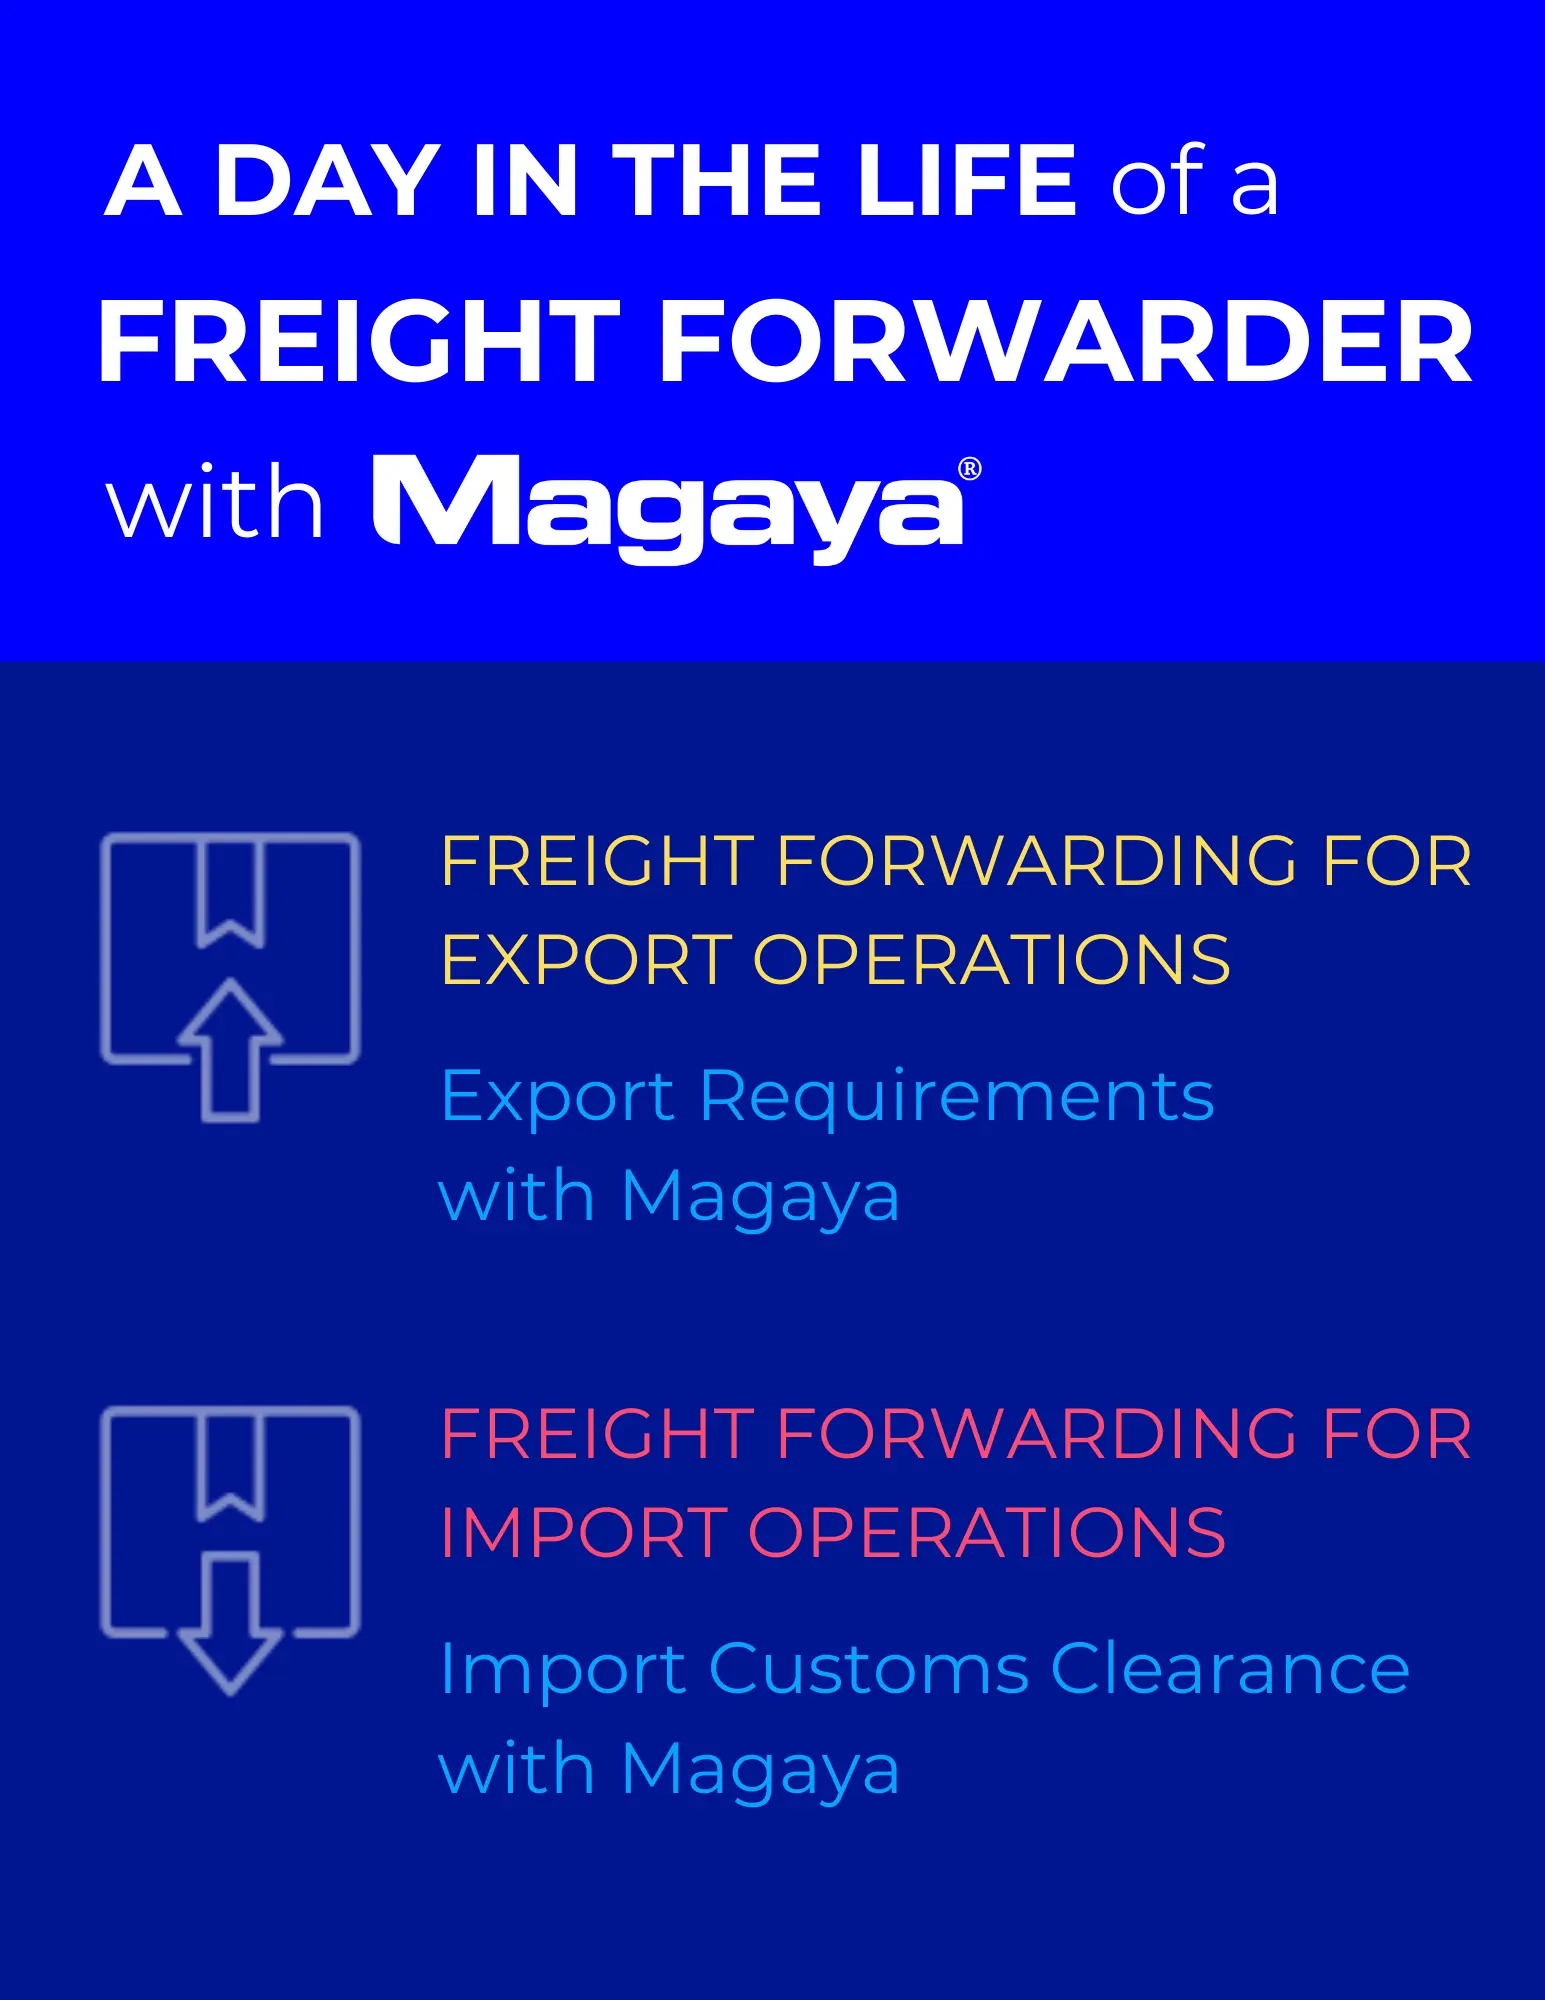 A Day in the Life of a Freight Forwarder